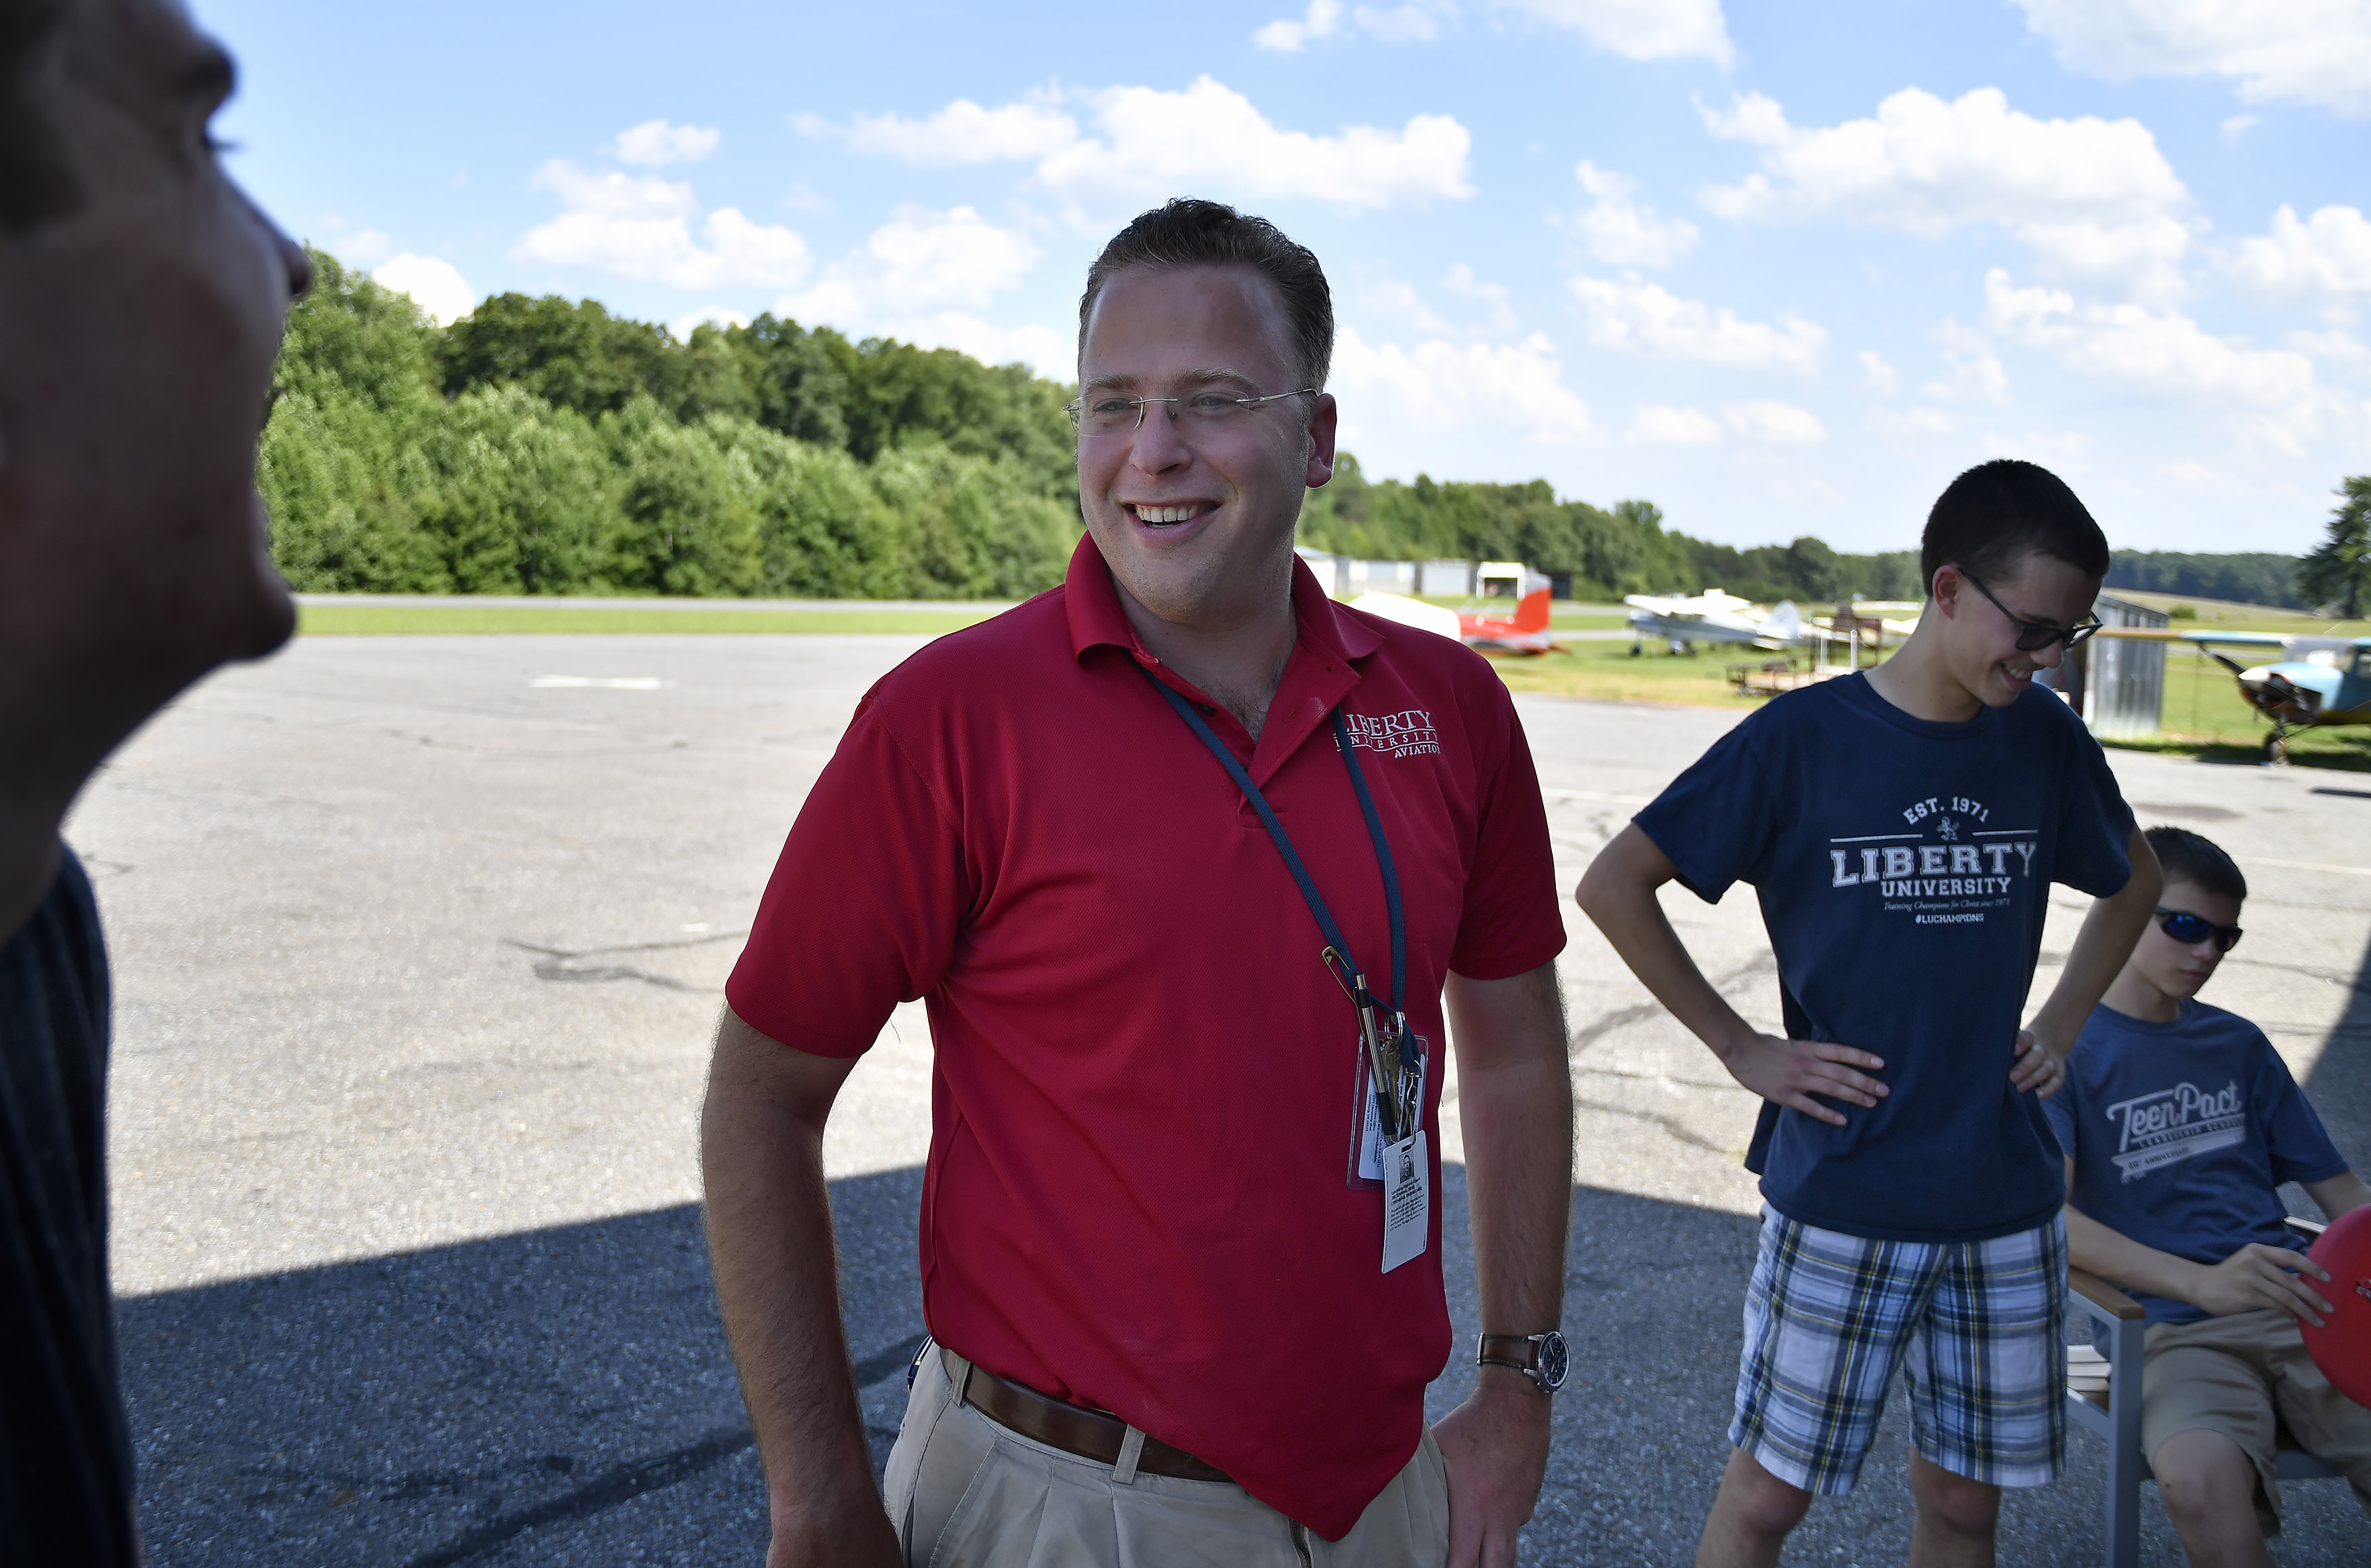 Instructor Chris Cartwright supervises six high school students who enrolled in a 30-day outreach camp to earn their private pilot certificates at Liberty University in Lynchburg, Virginia. Photo by David Tulis.